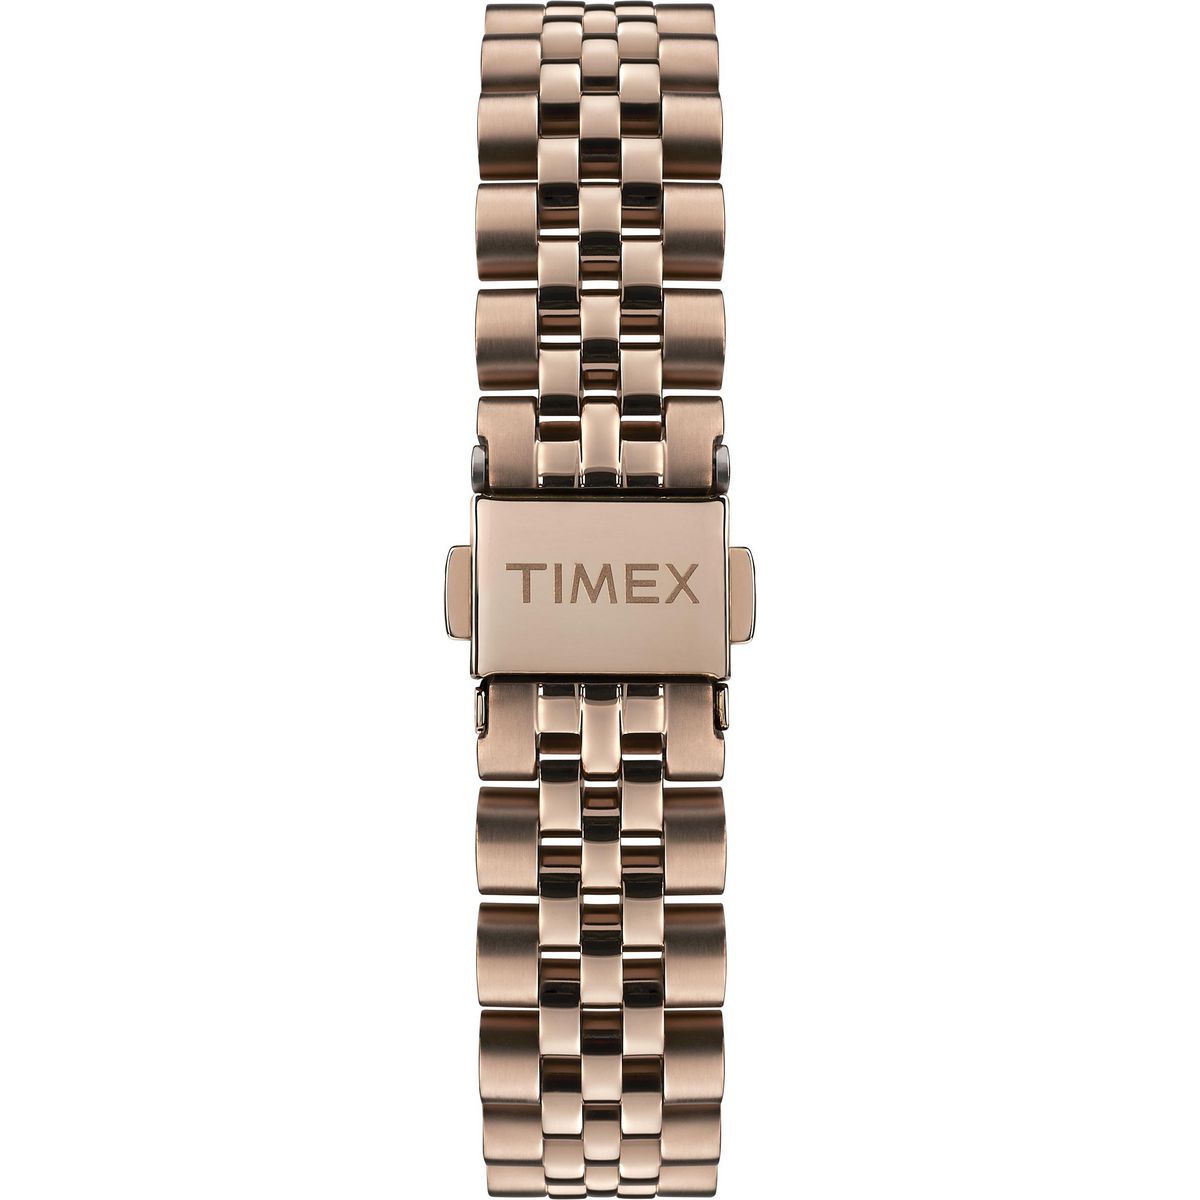 Timex Mother of Pearl Dial Analog Women Watch - TW2T89400